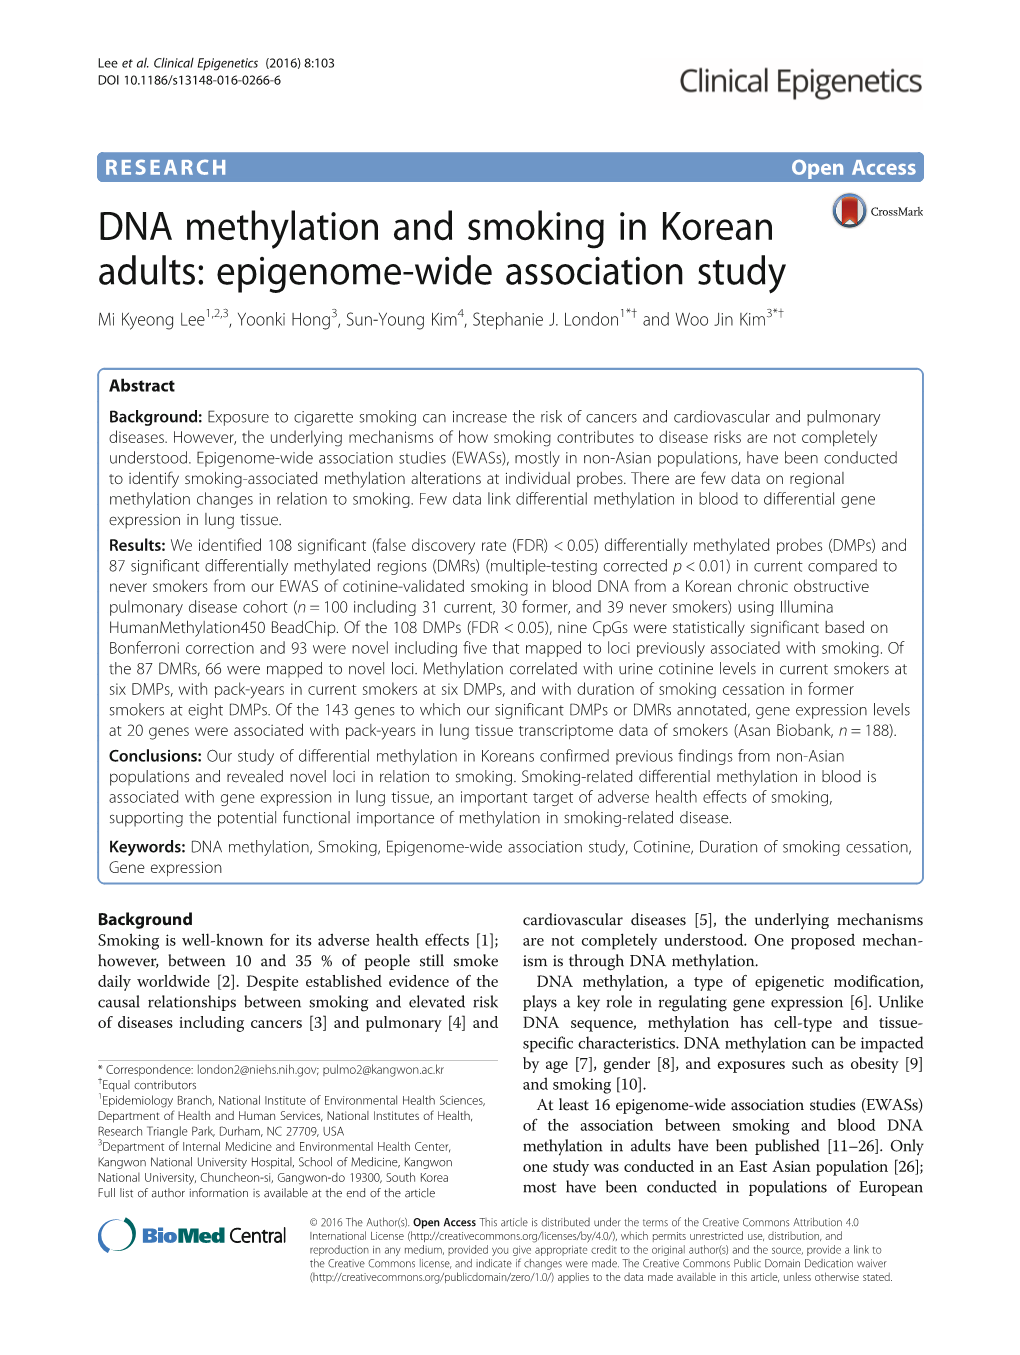 DNA Methylation and Smoking in Korean Adults: Epigenome-Wide Association Study Mi Kyeong Lee1,2,3, Yoonki Hong3, Sun-Young Kim4, Stephanie J